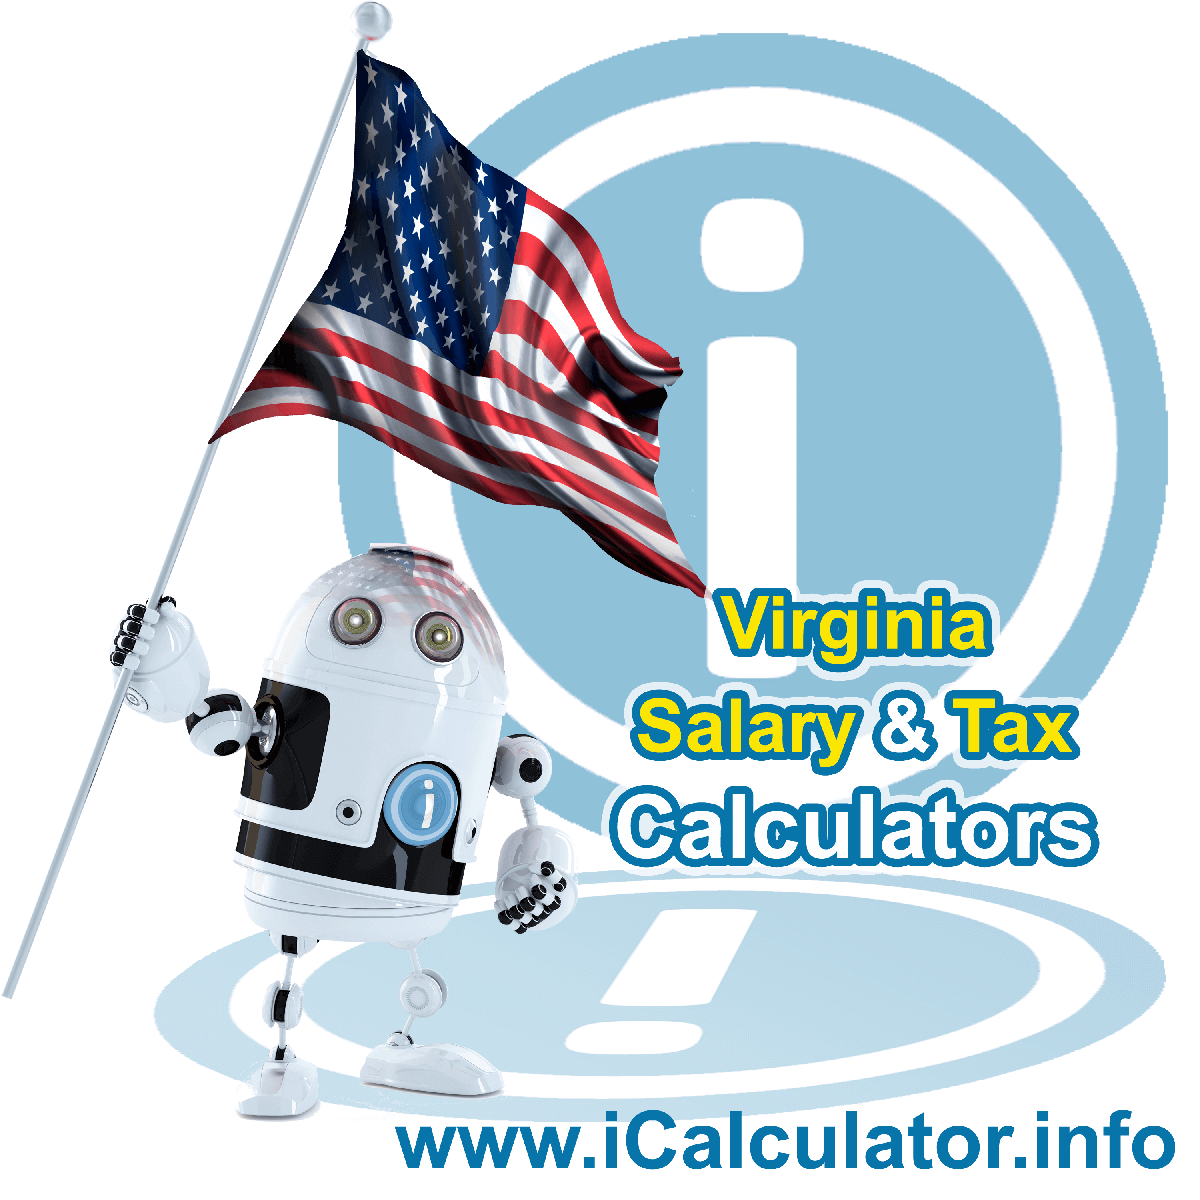 Virginia Salary Calculator 2023 | iCalculator™ | The Virginia Salary Calculator allows you to quickly calculate your salary after tax including Virginia State Tax, Federal State Tax, Medicare Deductions, Social Security, Capital Gains and other income tax and salary deductions complete with supporting Virginia state tax tables 